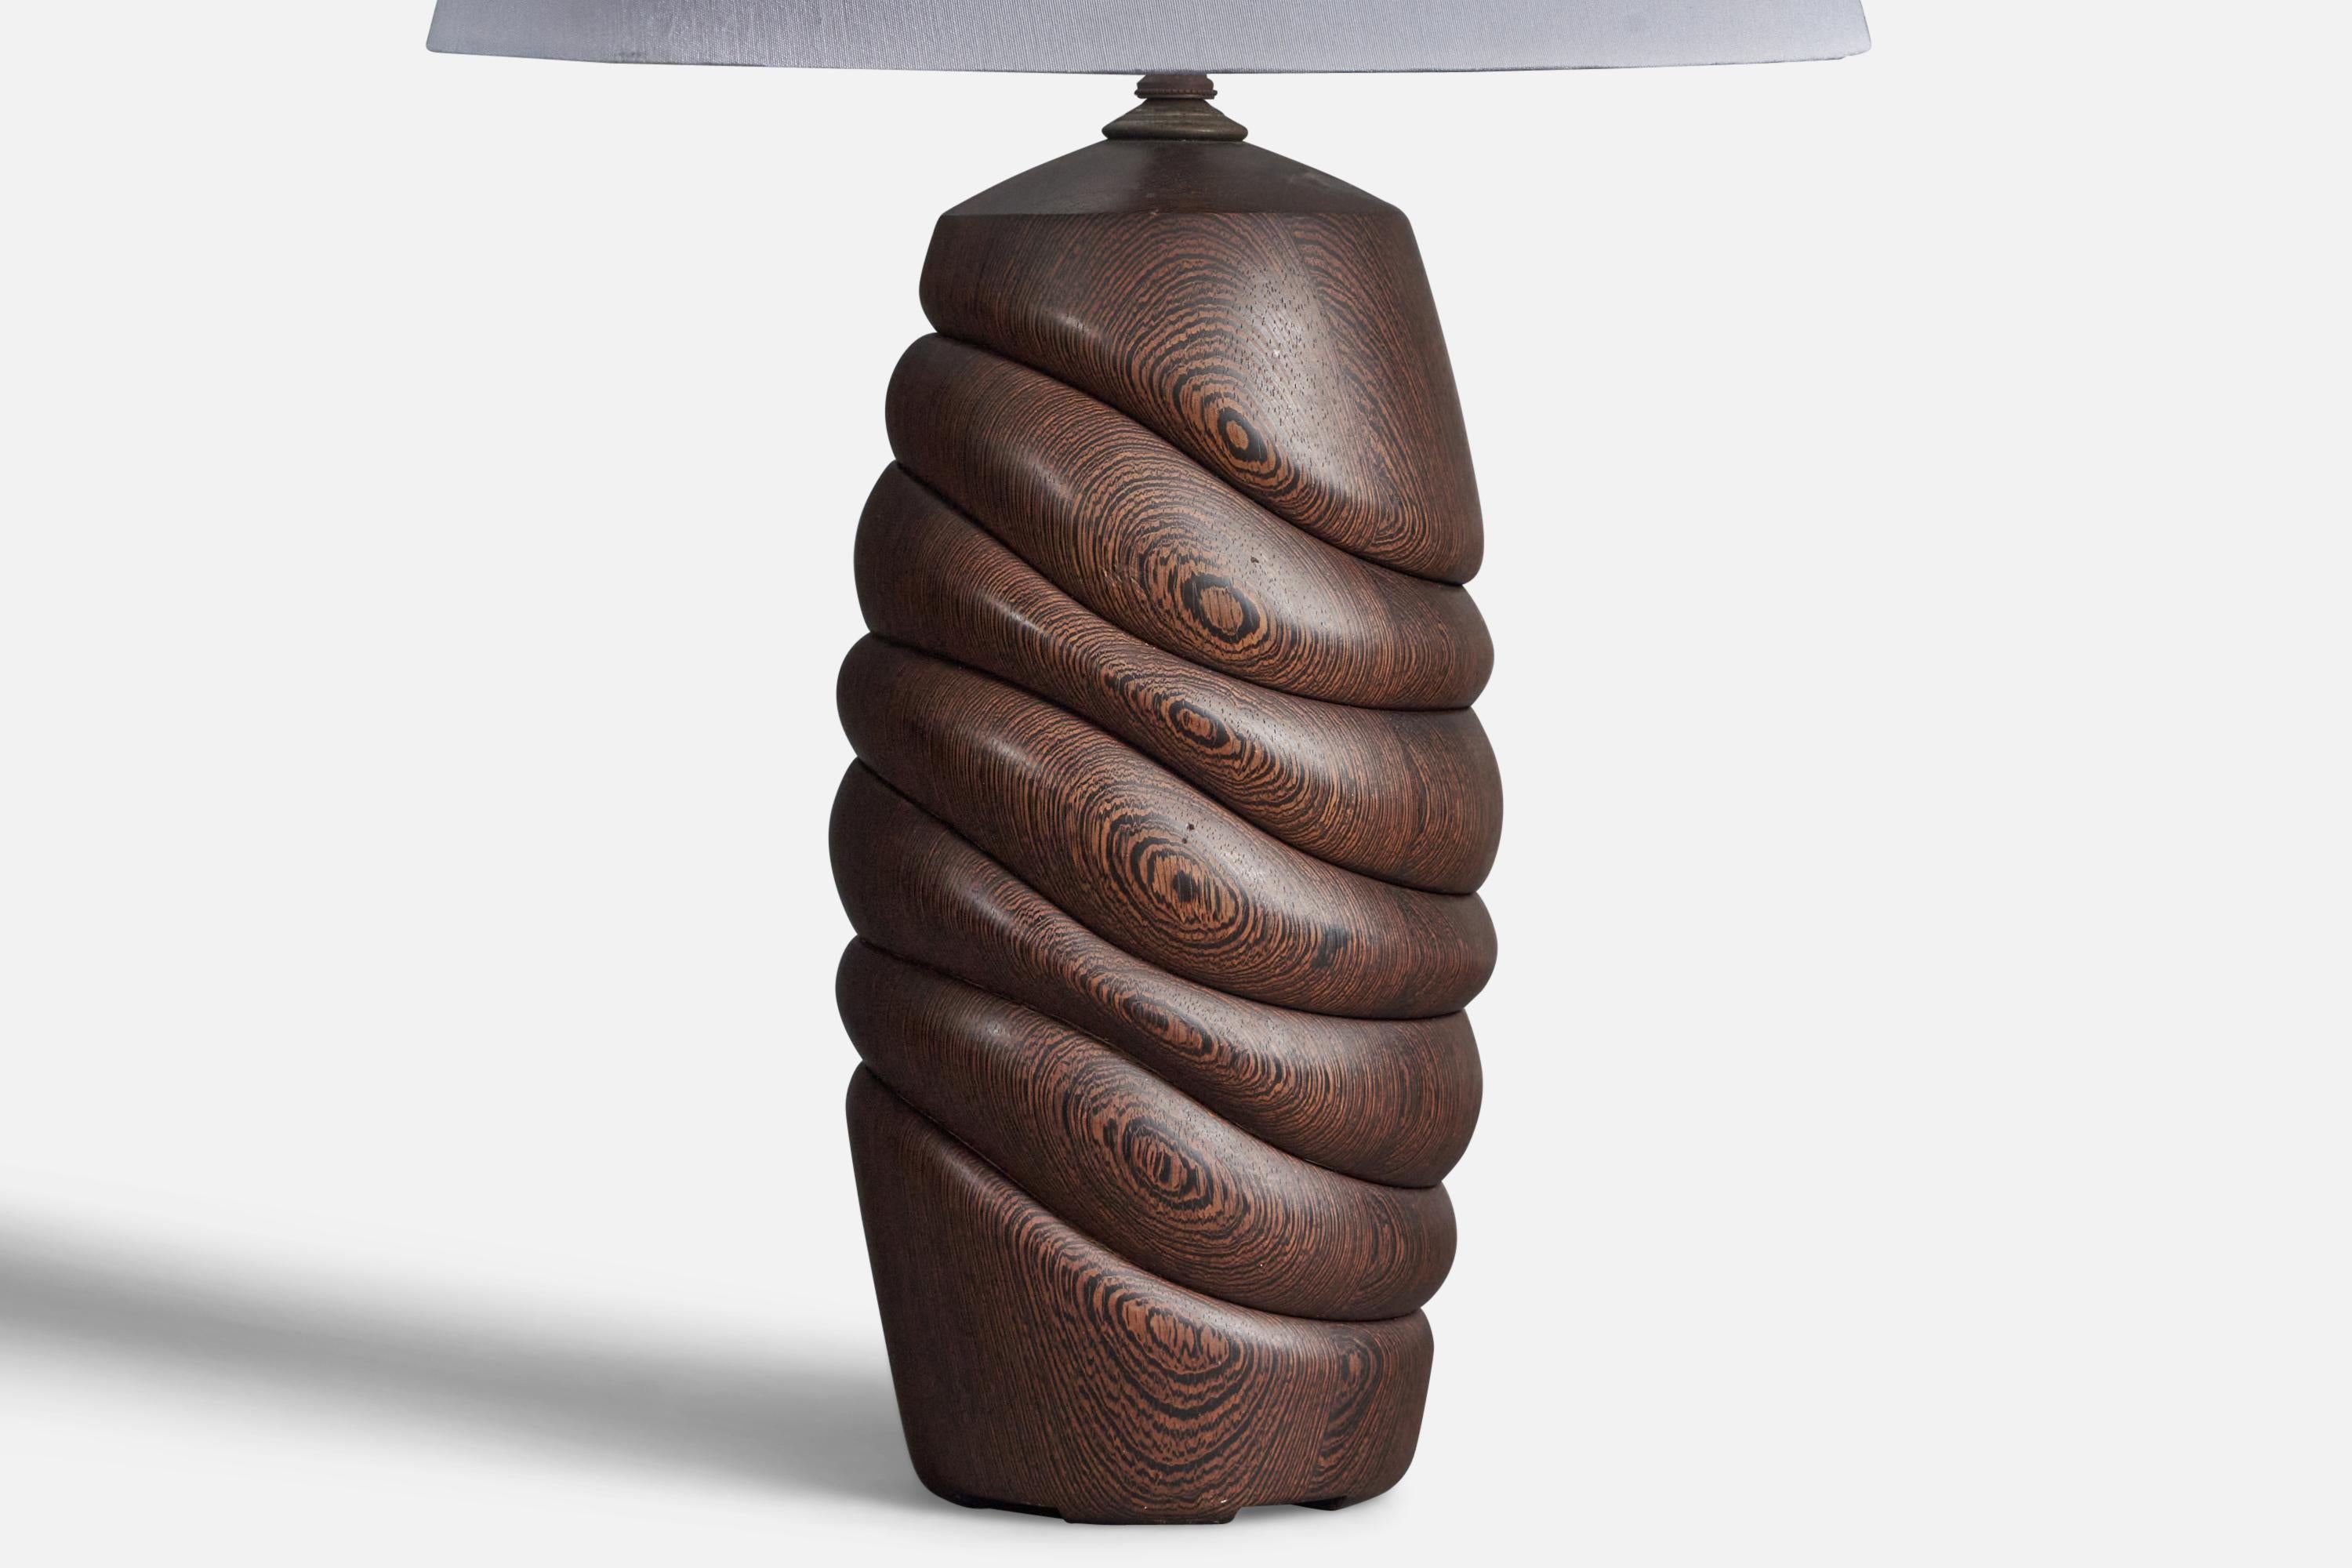 An organic table lamp. Designed and produced in solid Wenge. Signed and dated 1980. Sold without lampshade.

Other designers of the period include Yasha Heifets, Isamu Noguchi, George Nakashima, Vladimir Kagan, and Edward Wormley.